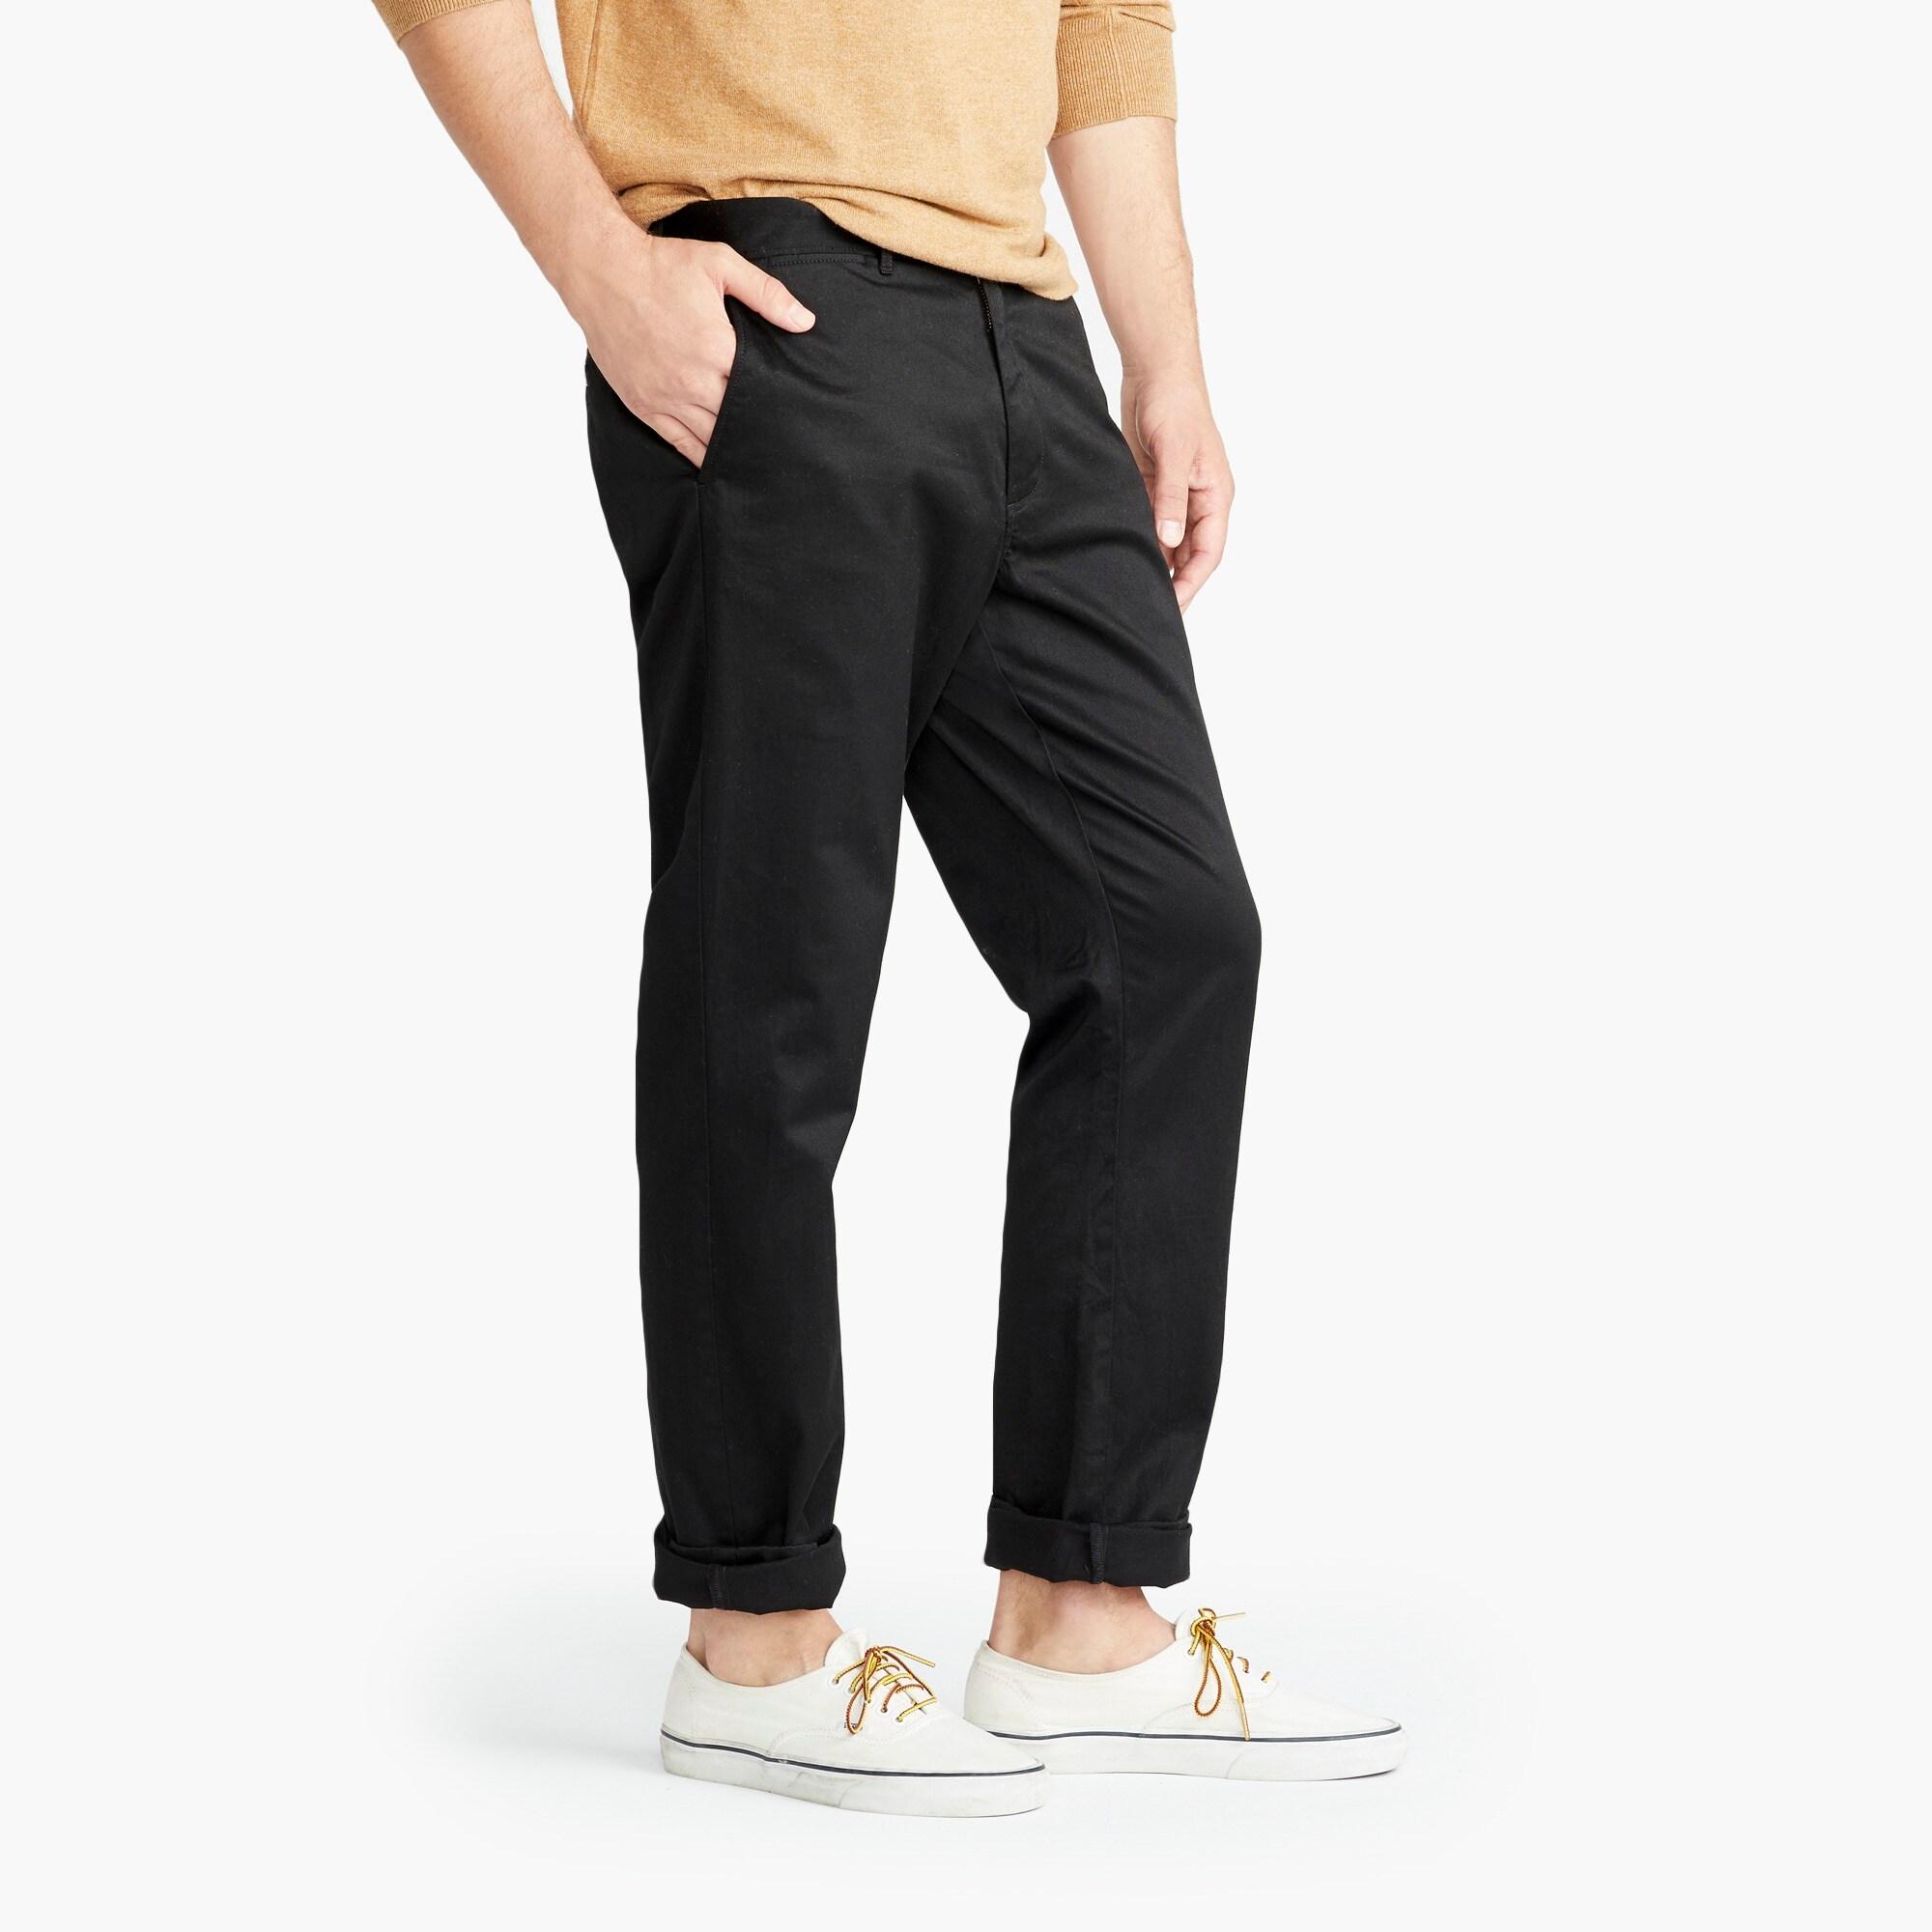 J.Crew Cotton 1040 Athletic-fit Stretch Chino Pant in Black for Men - Lyst